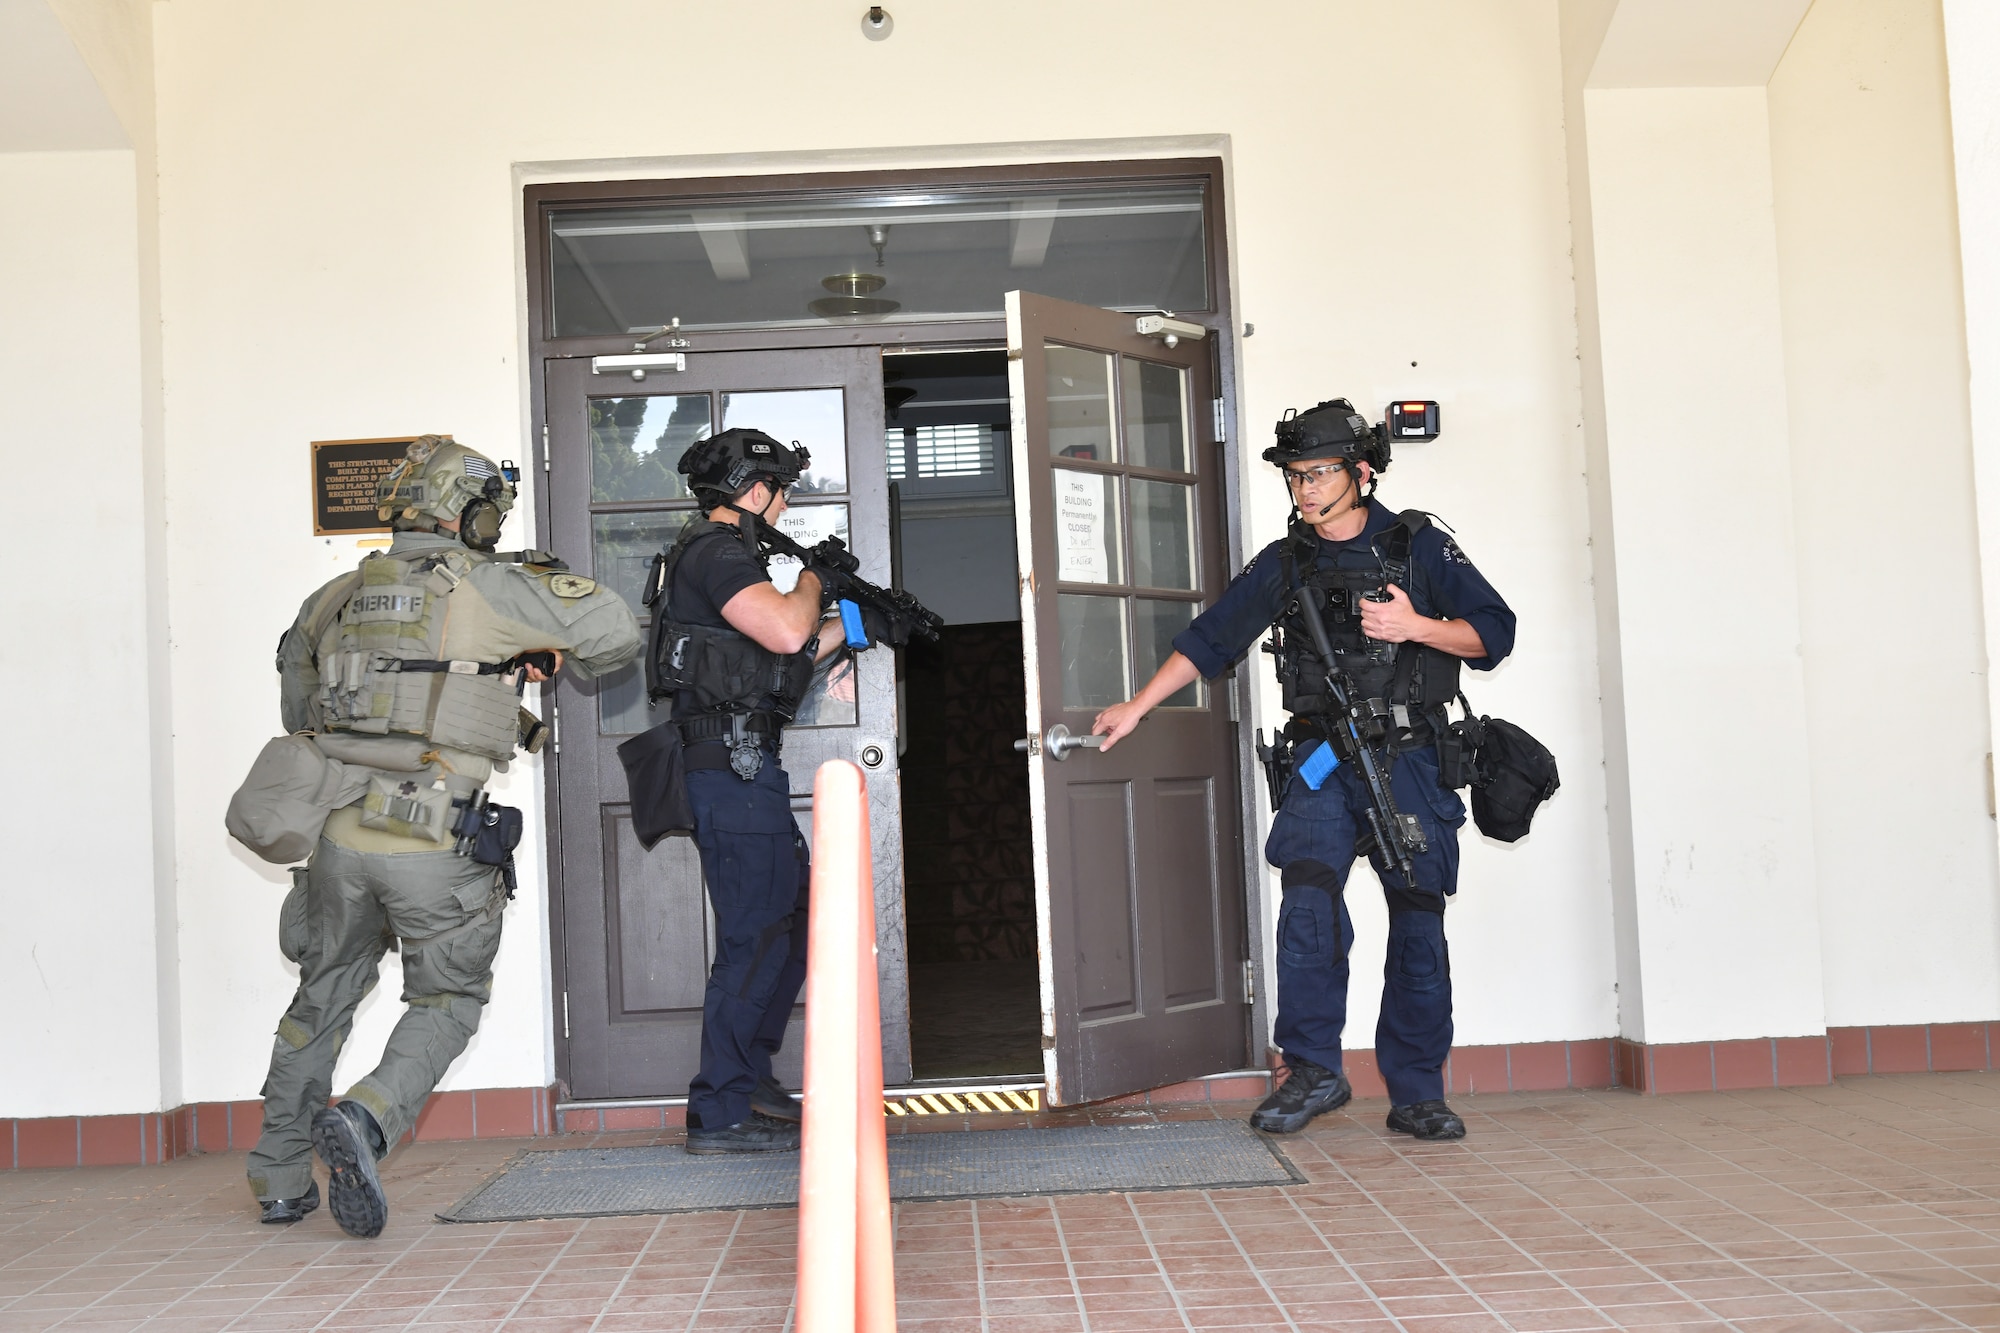 SWAT members pictured entering the front door of lodging on Fort Mac Arthur to begin their training.